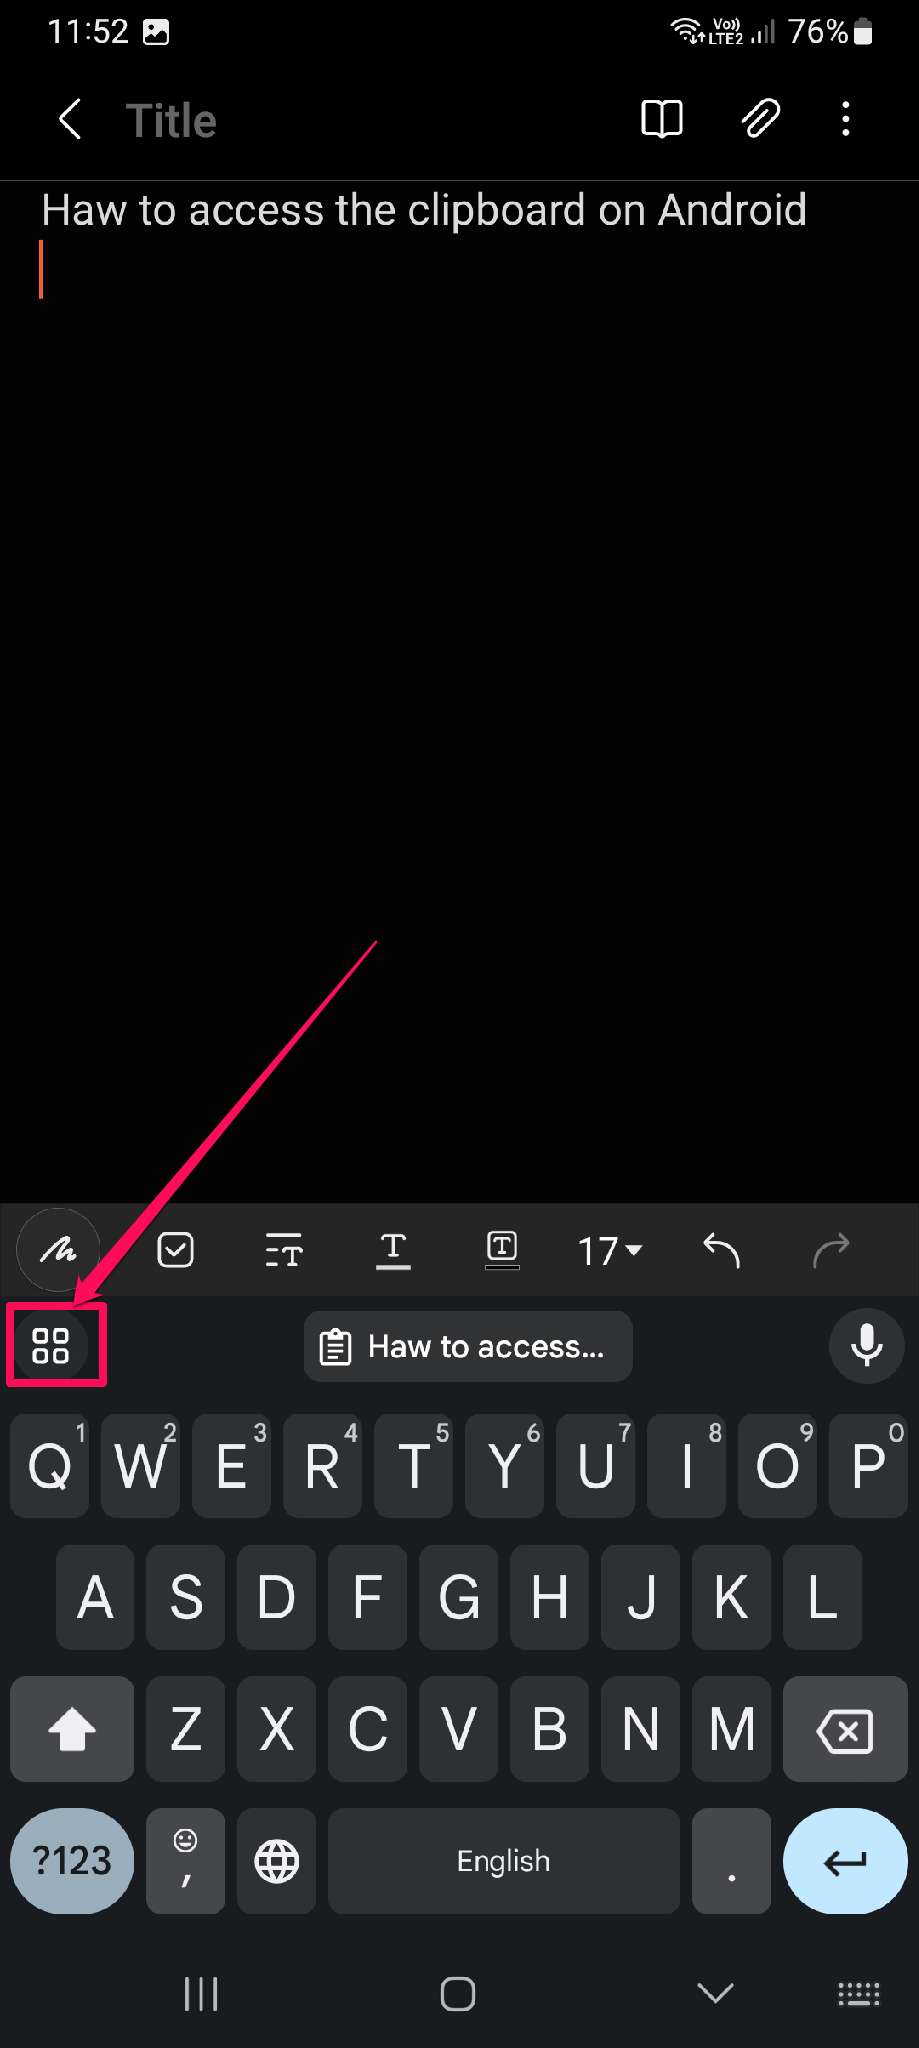 Clicking on the icon How to access the clipboard on Android